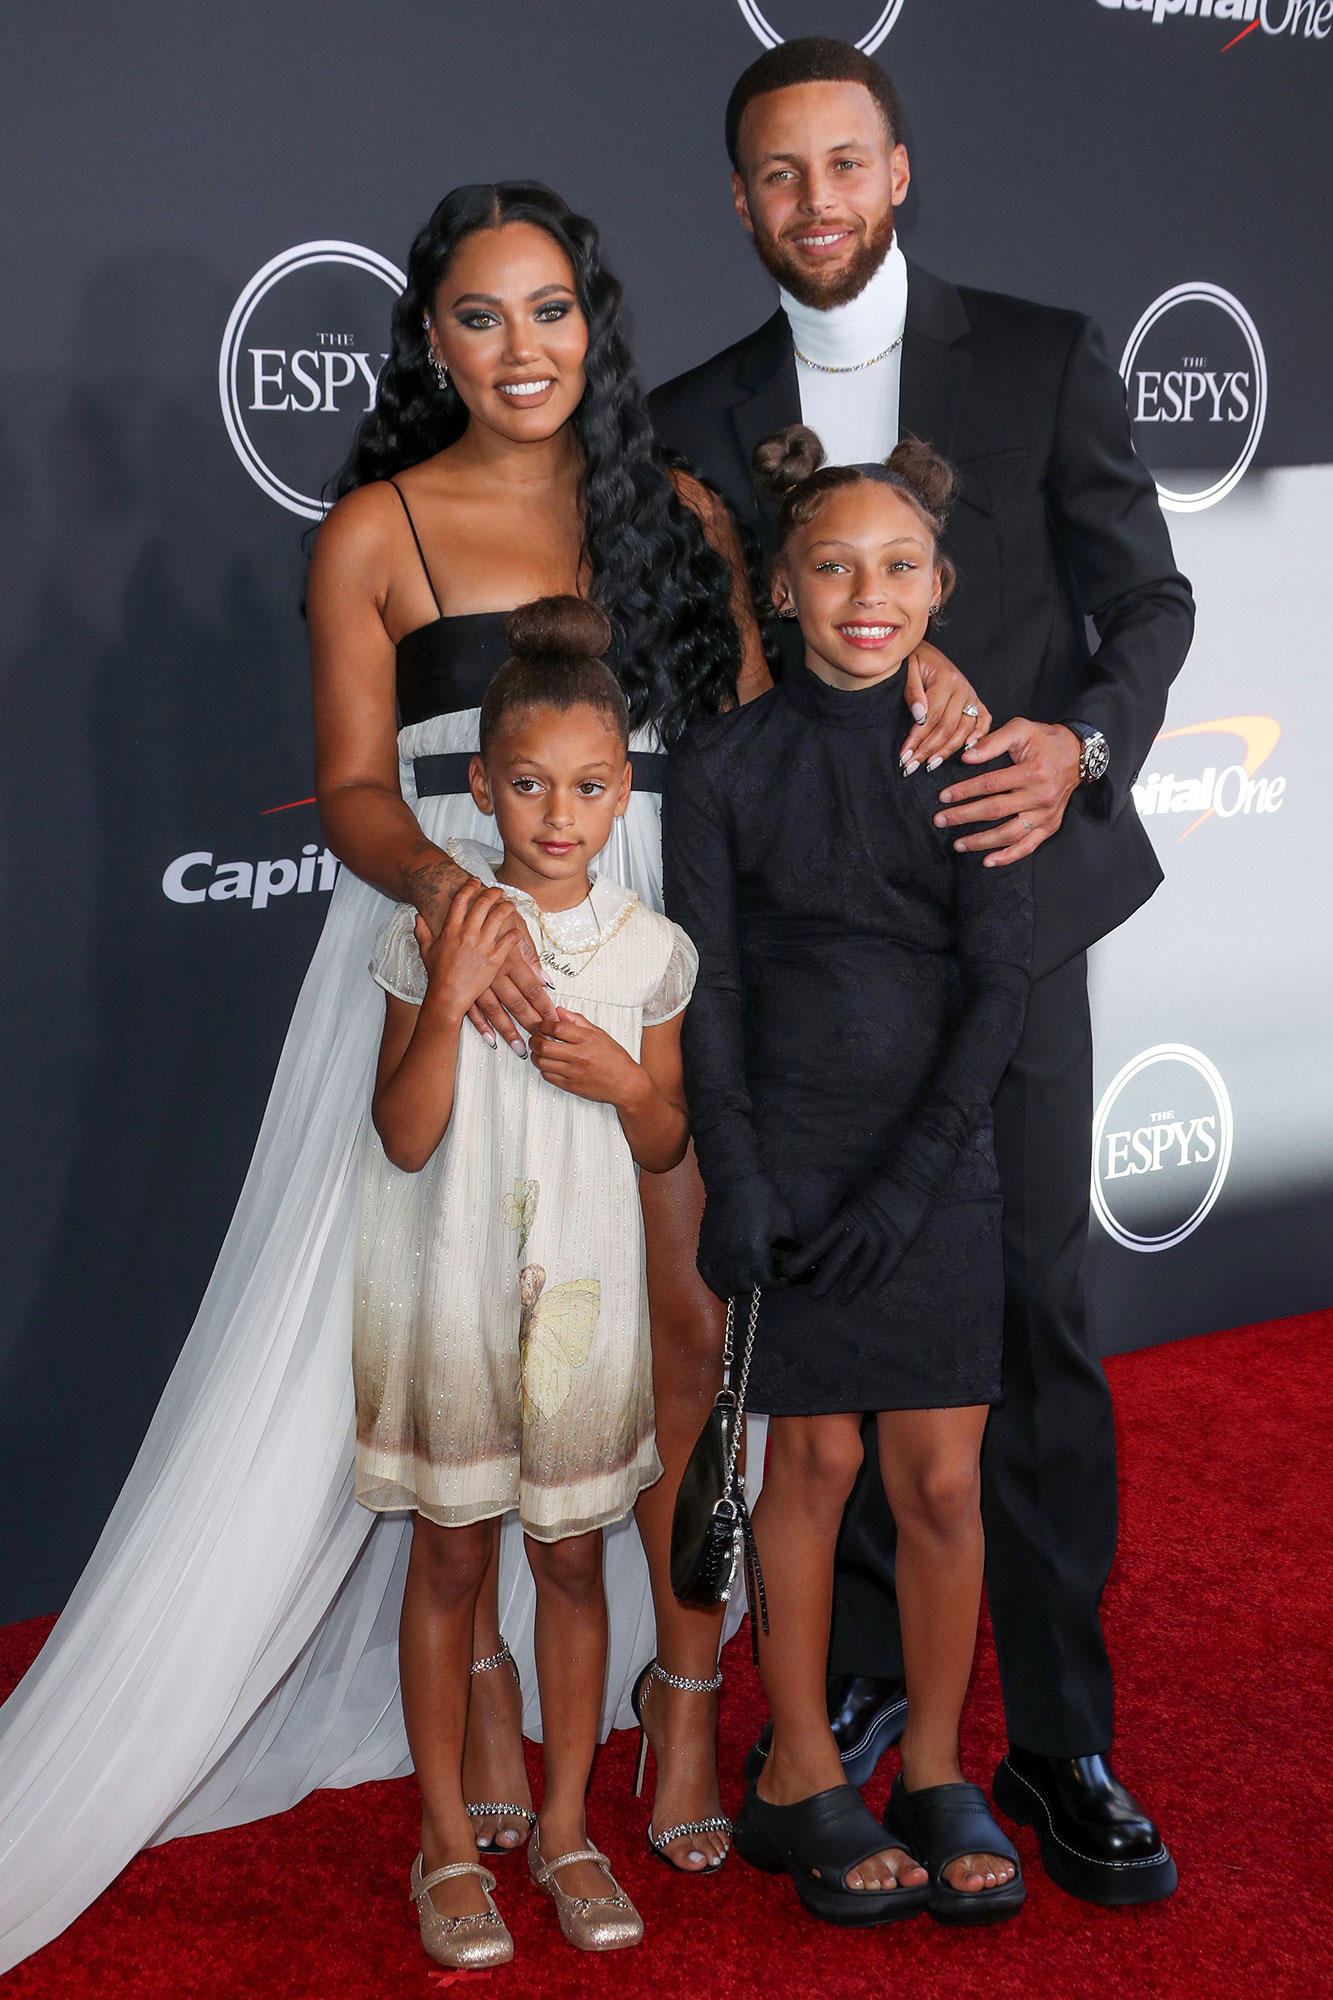 Steph Curry Three Kids Are Getting So Big!